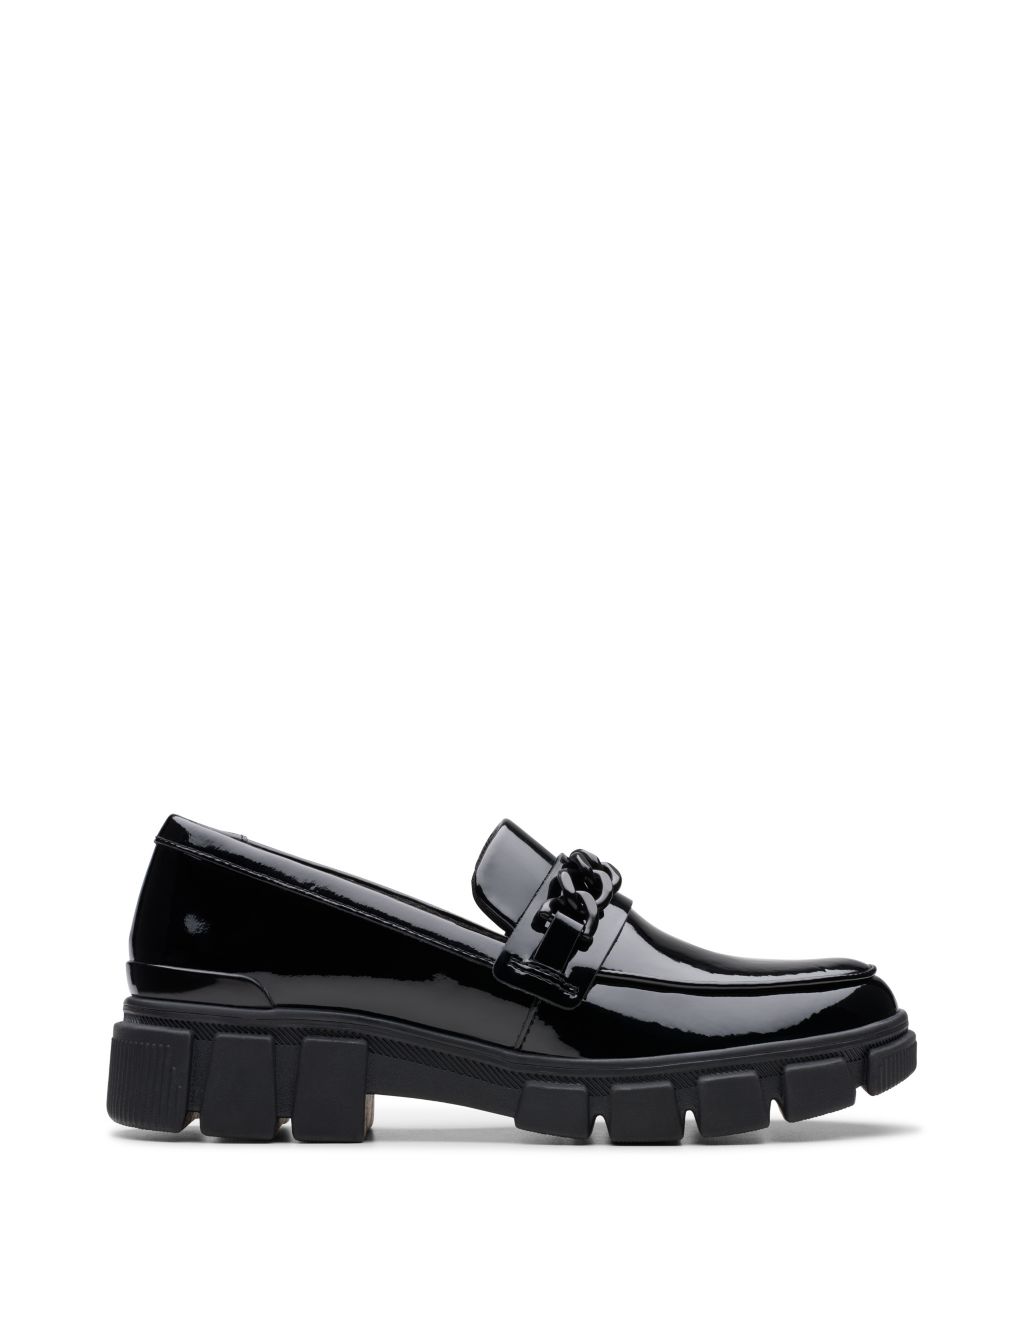 Kids' Patent Leather Loafers (3 Large to 7 Large)